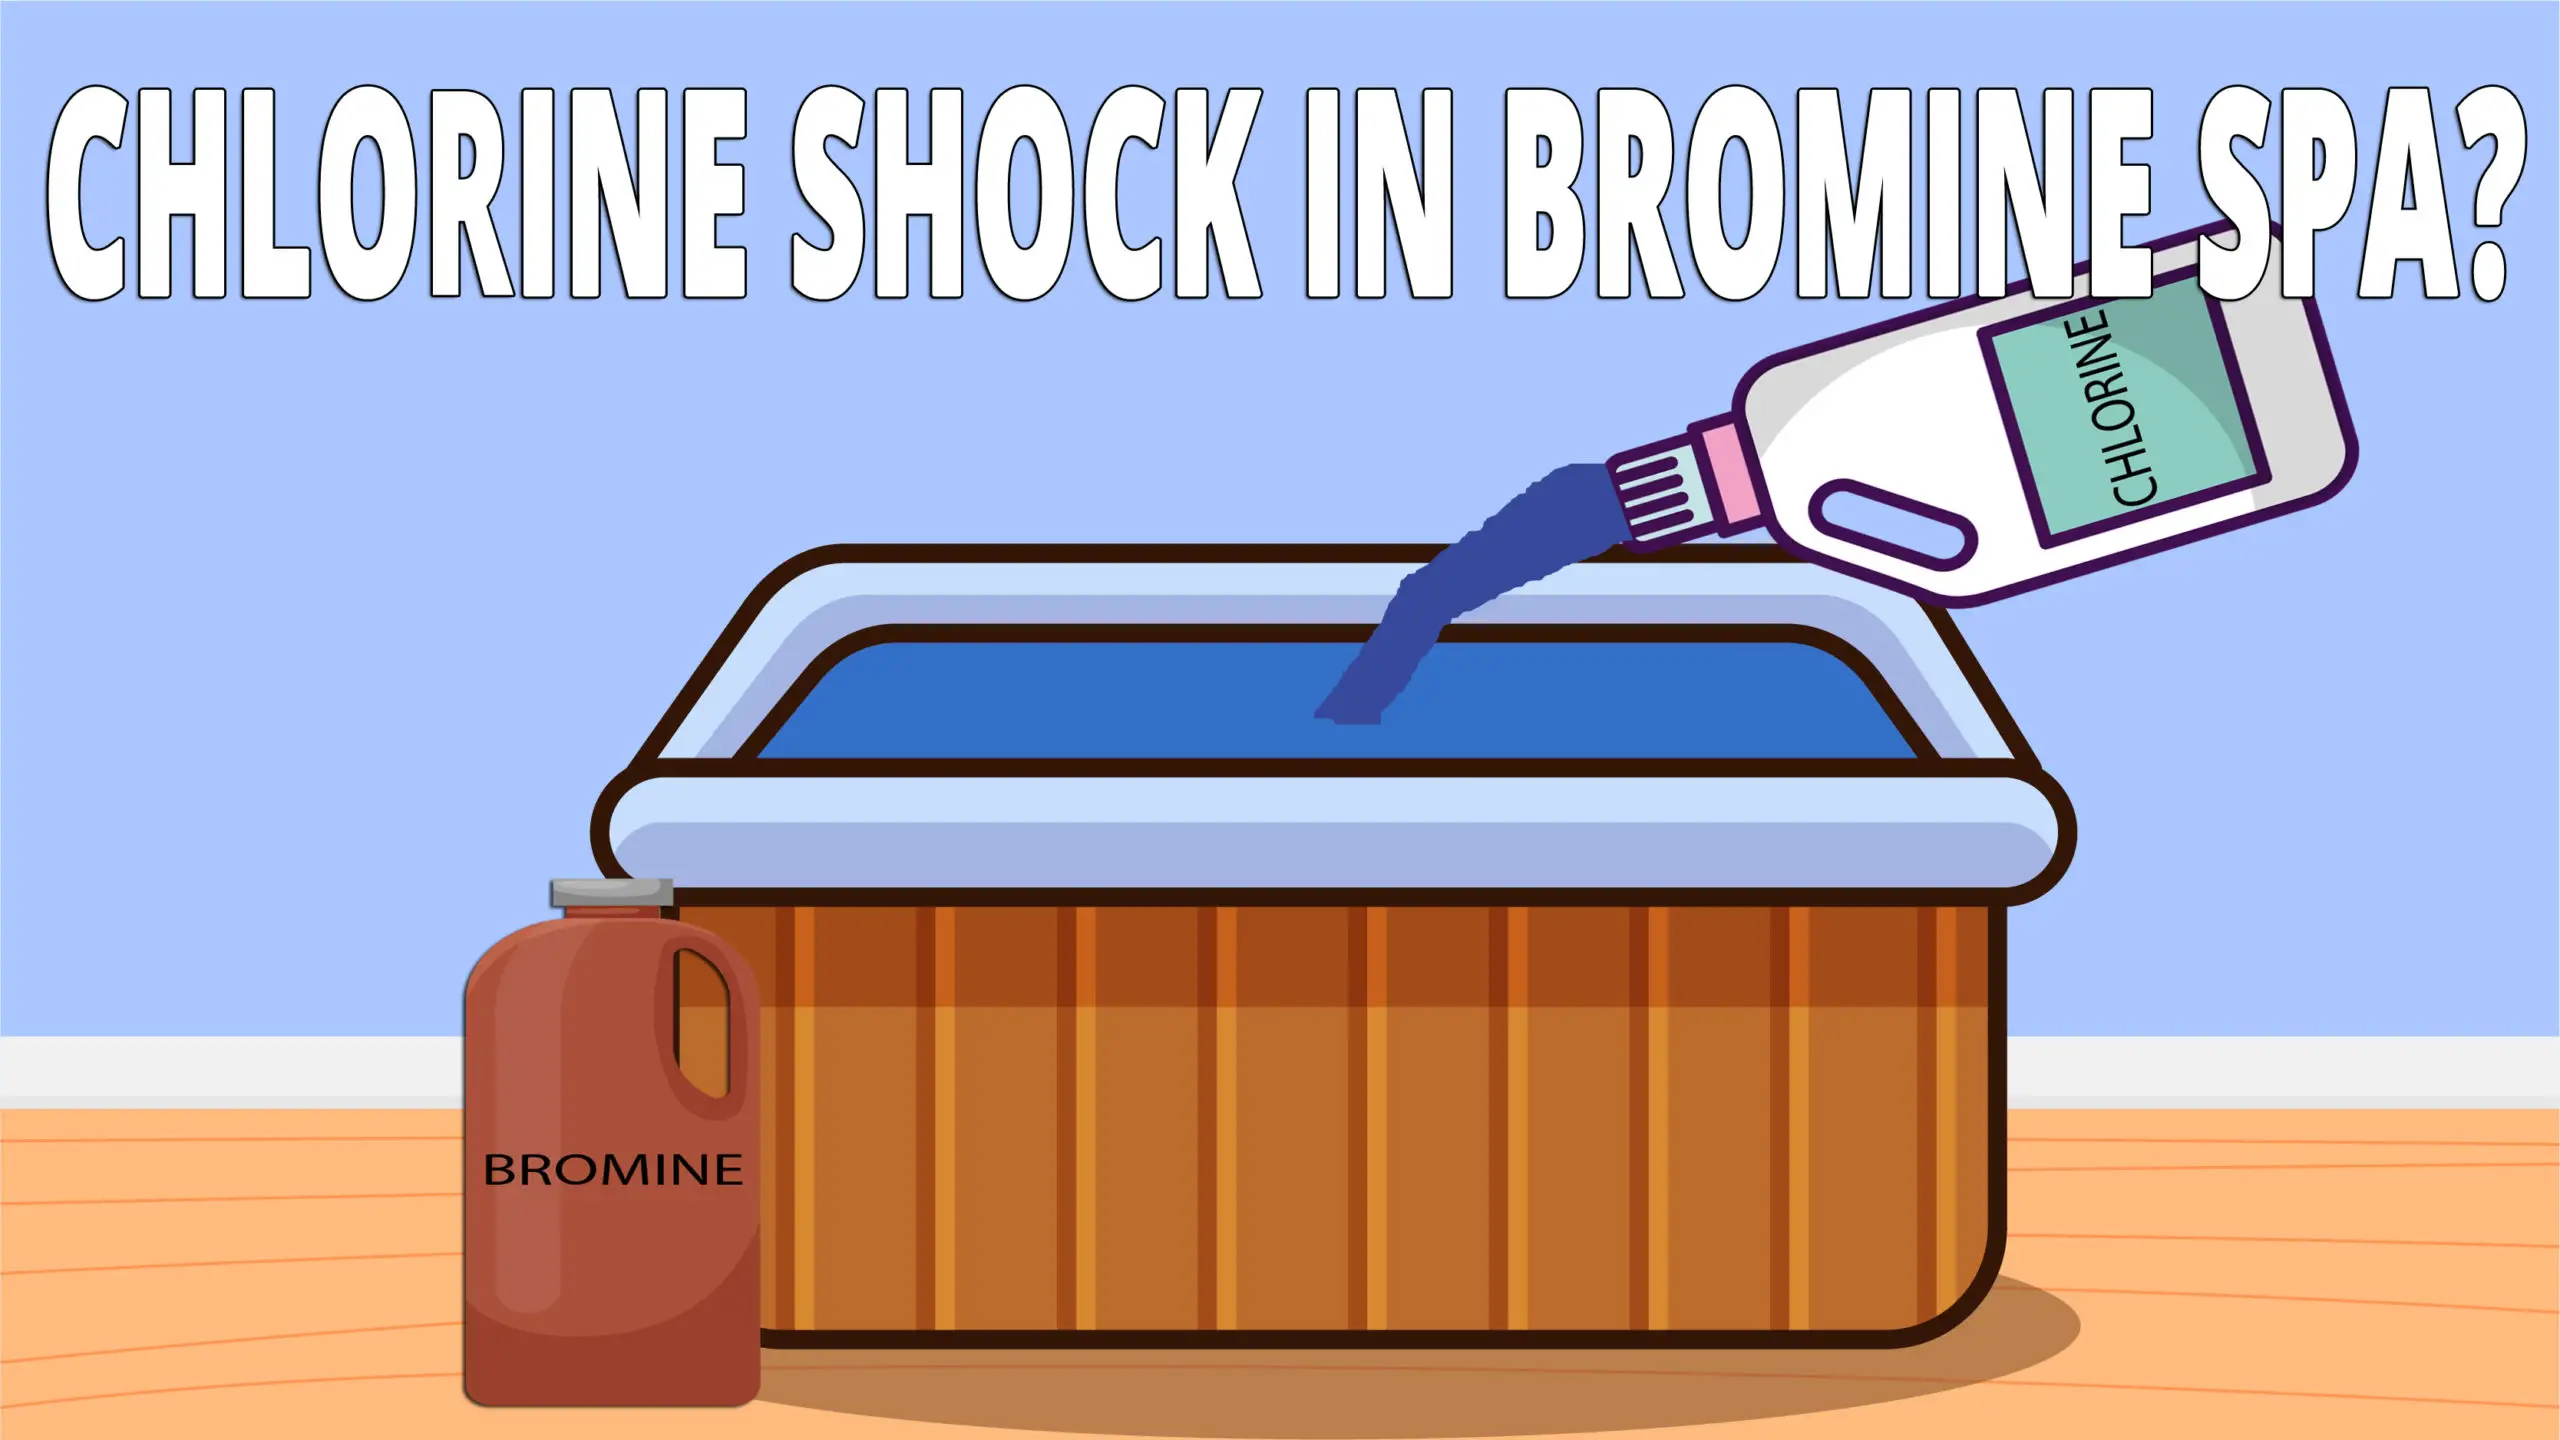 Can You Use Chlorine Shock in a Bromine Spa?